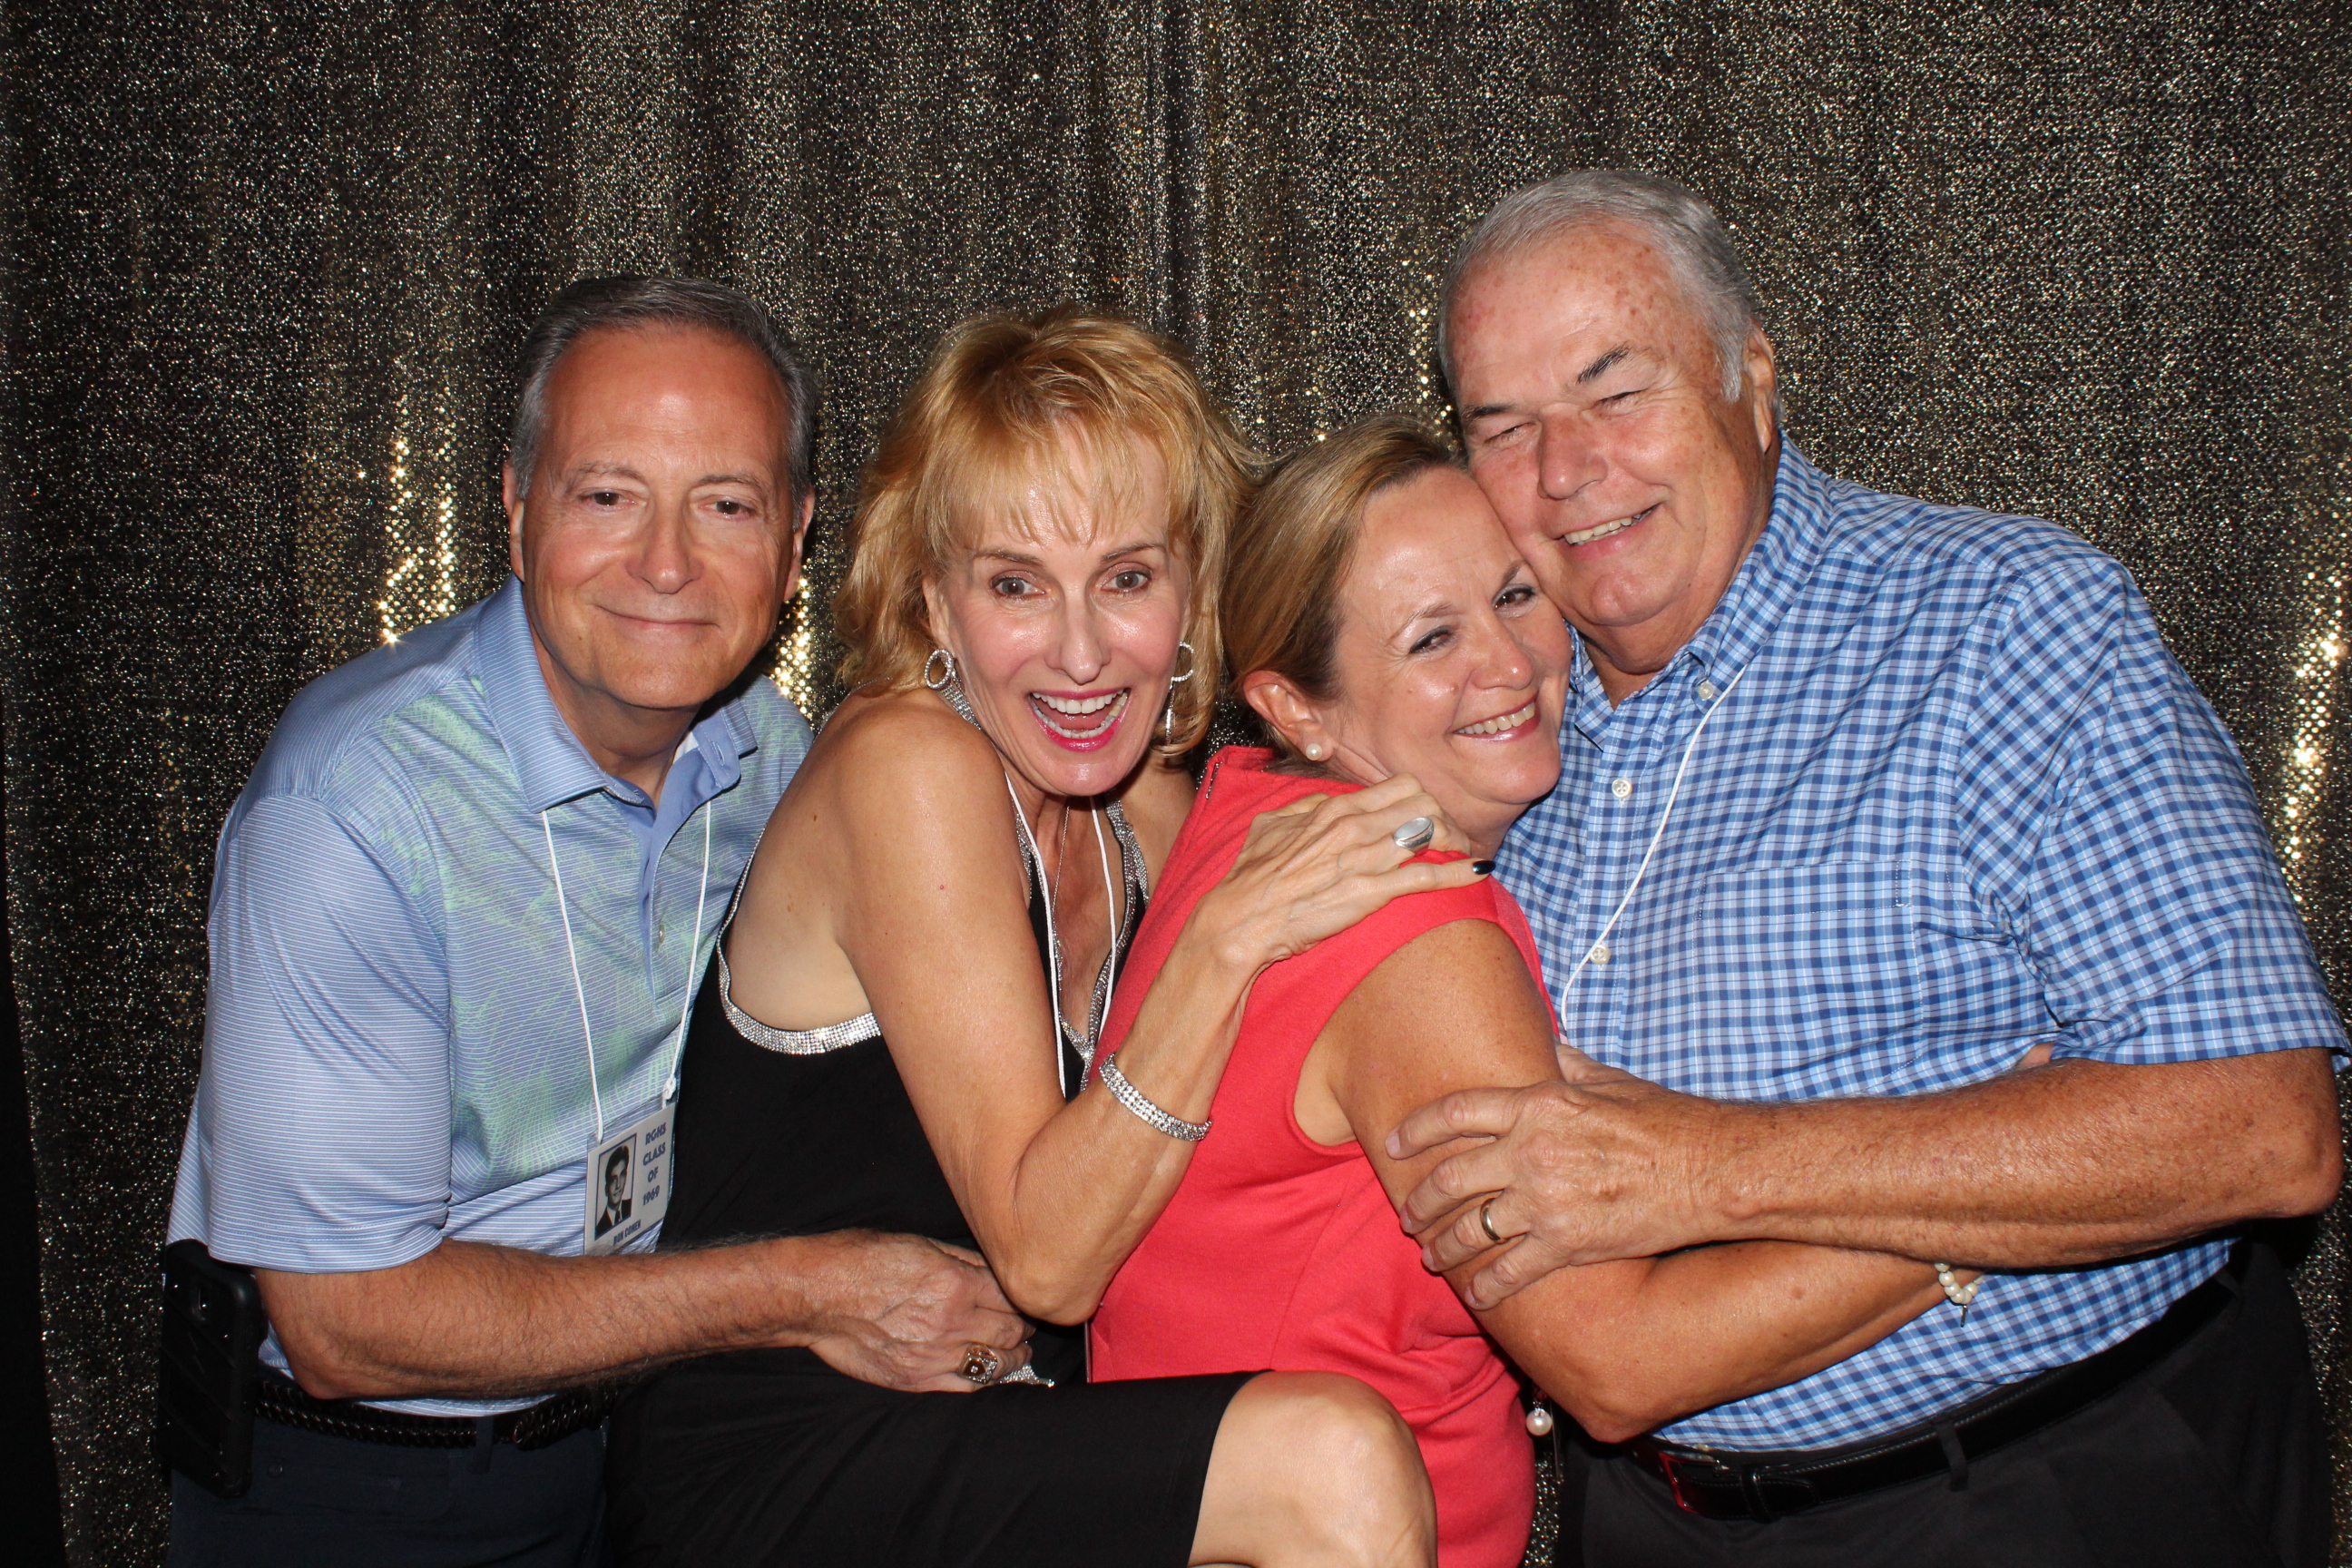 PHOTO BOOTH: Ron and Judy Cohen; Cindy Capnerhurst and Steve Robison